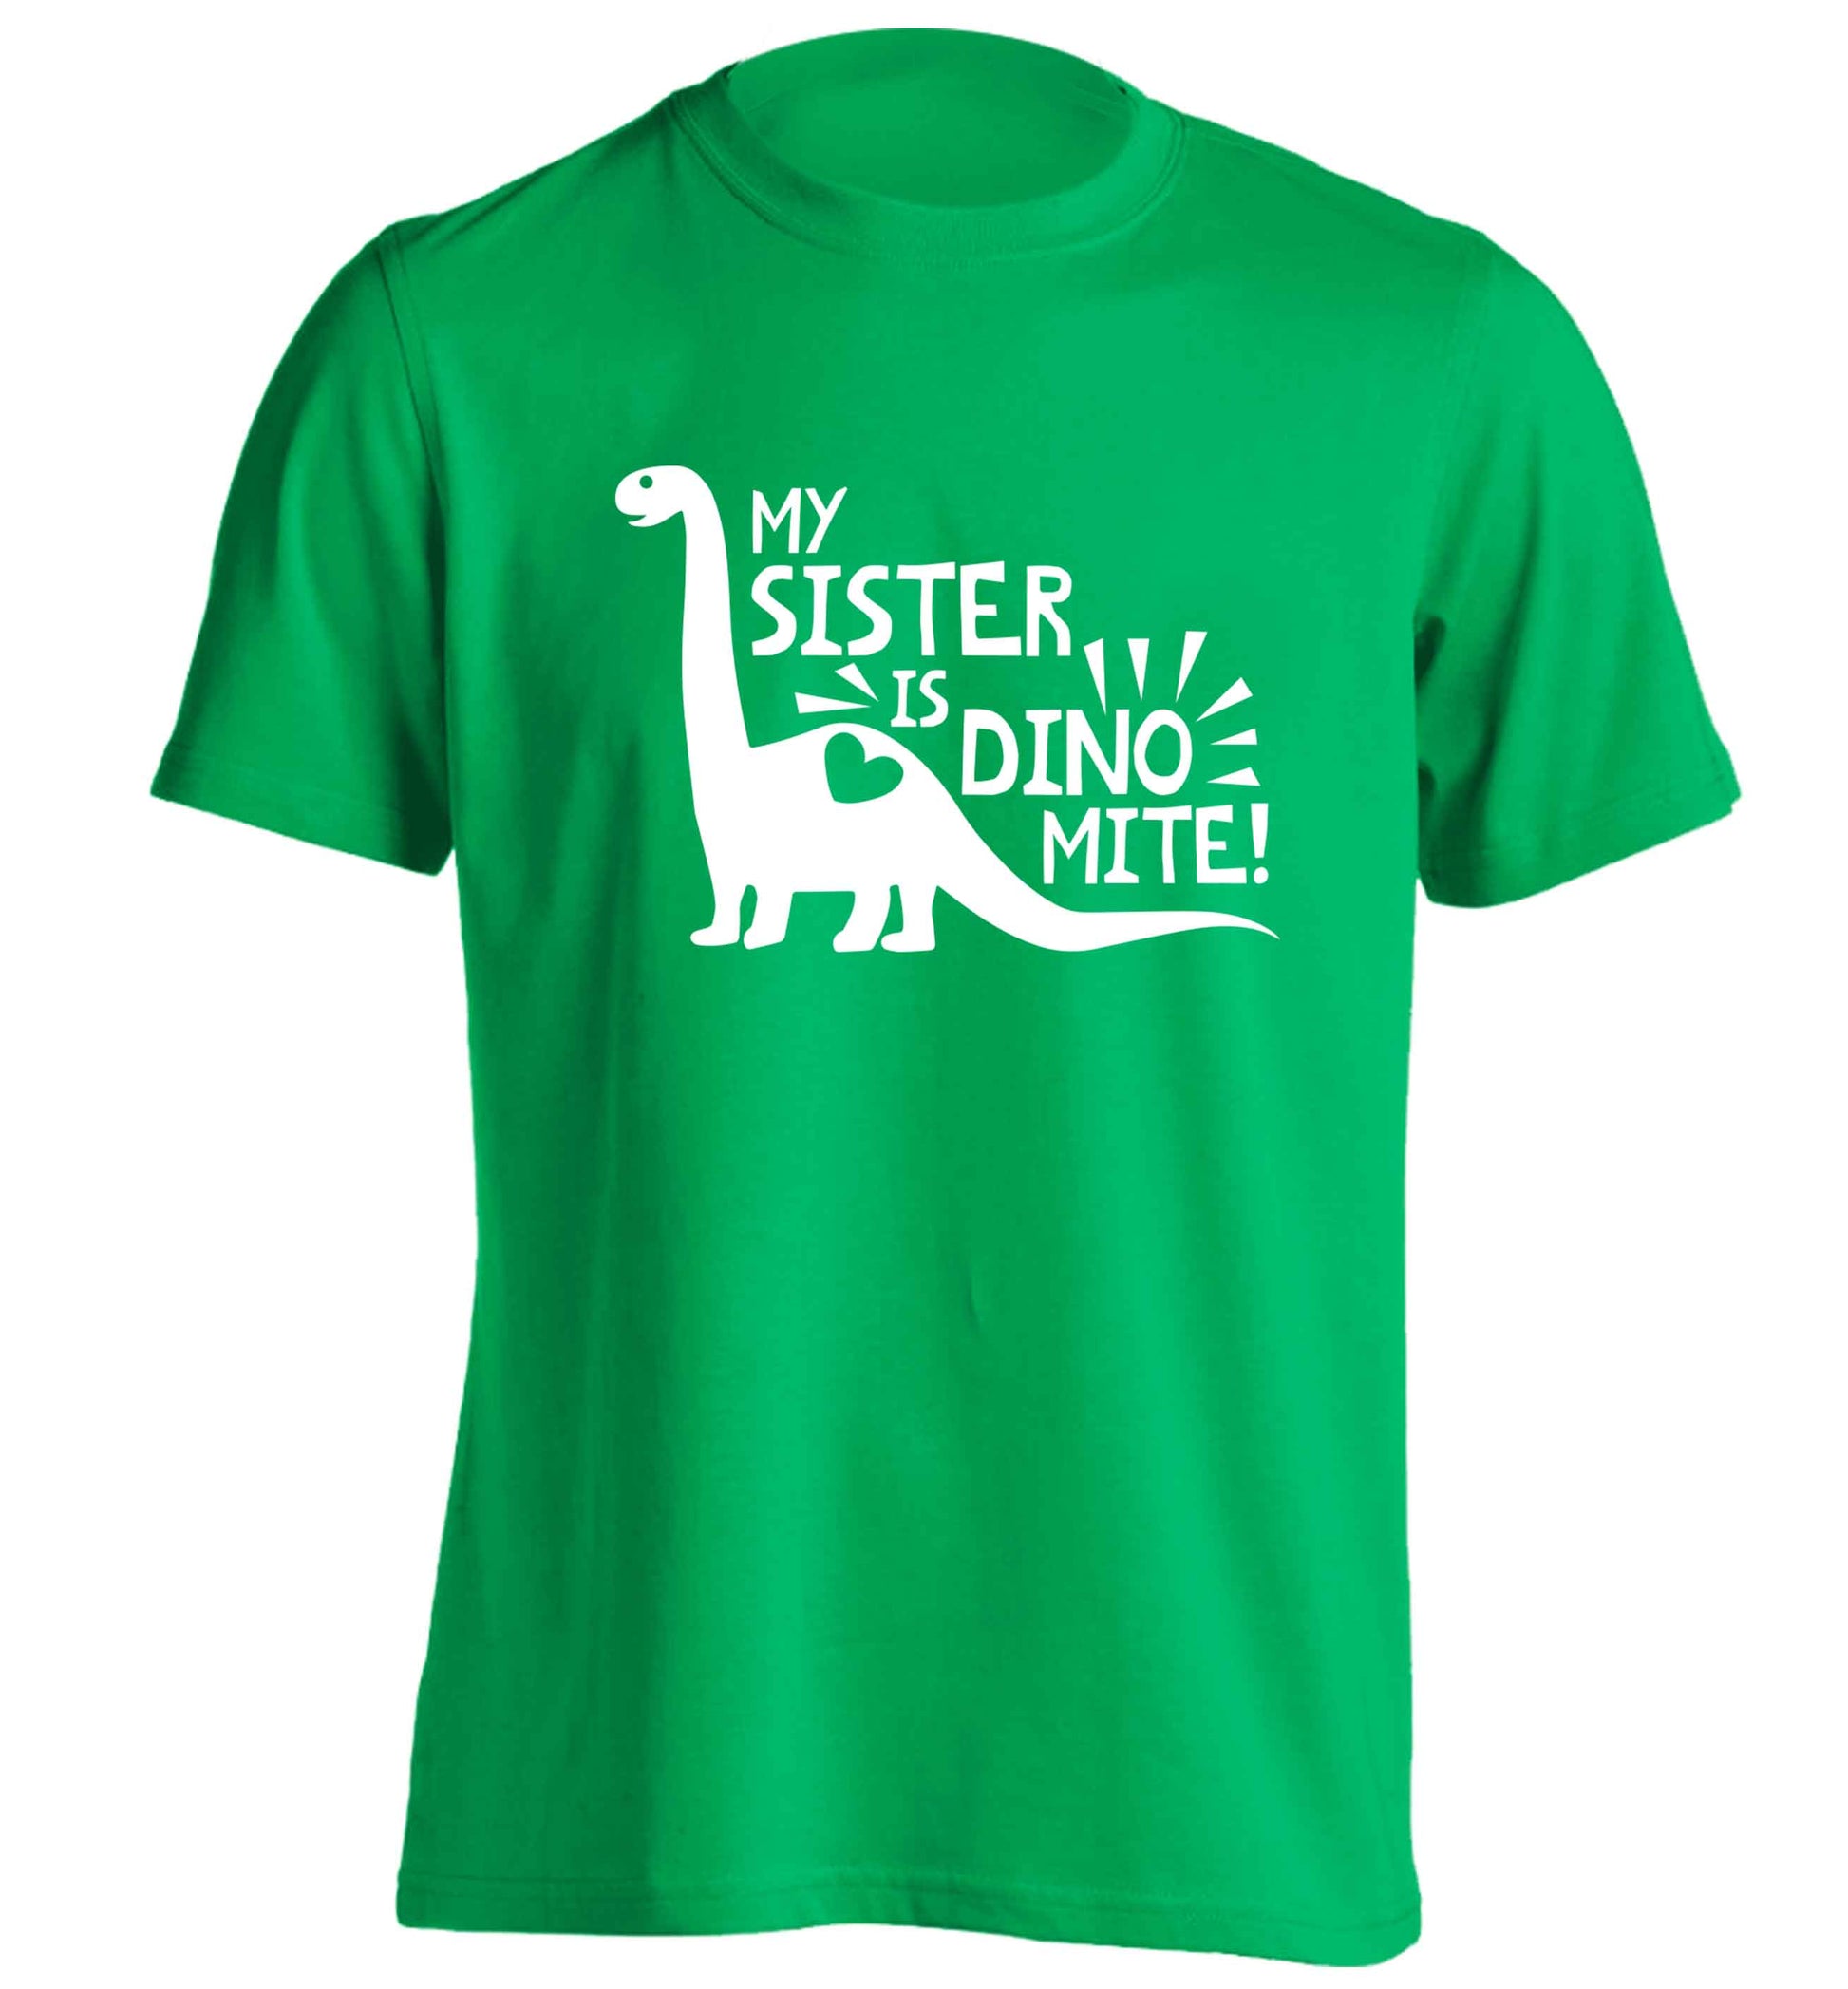 My sister is dinomite! adults unisex green Tshirt 2XL